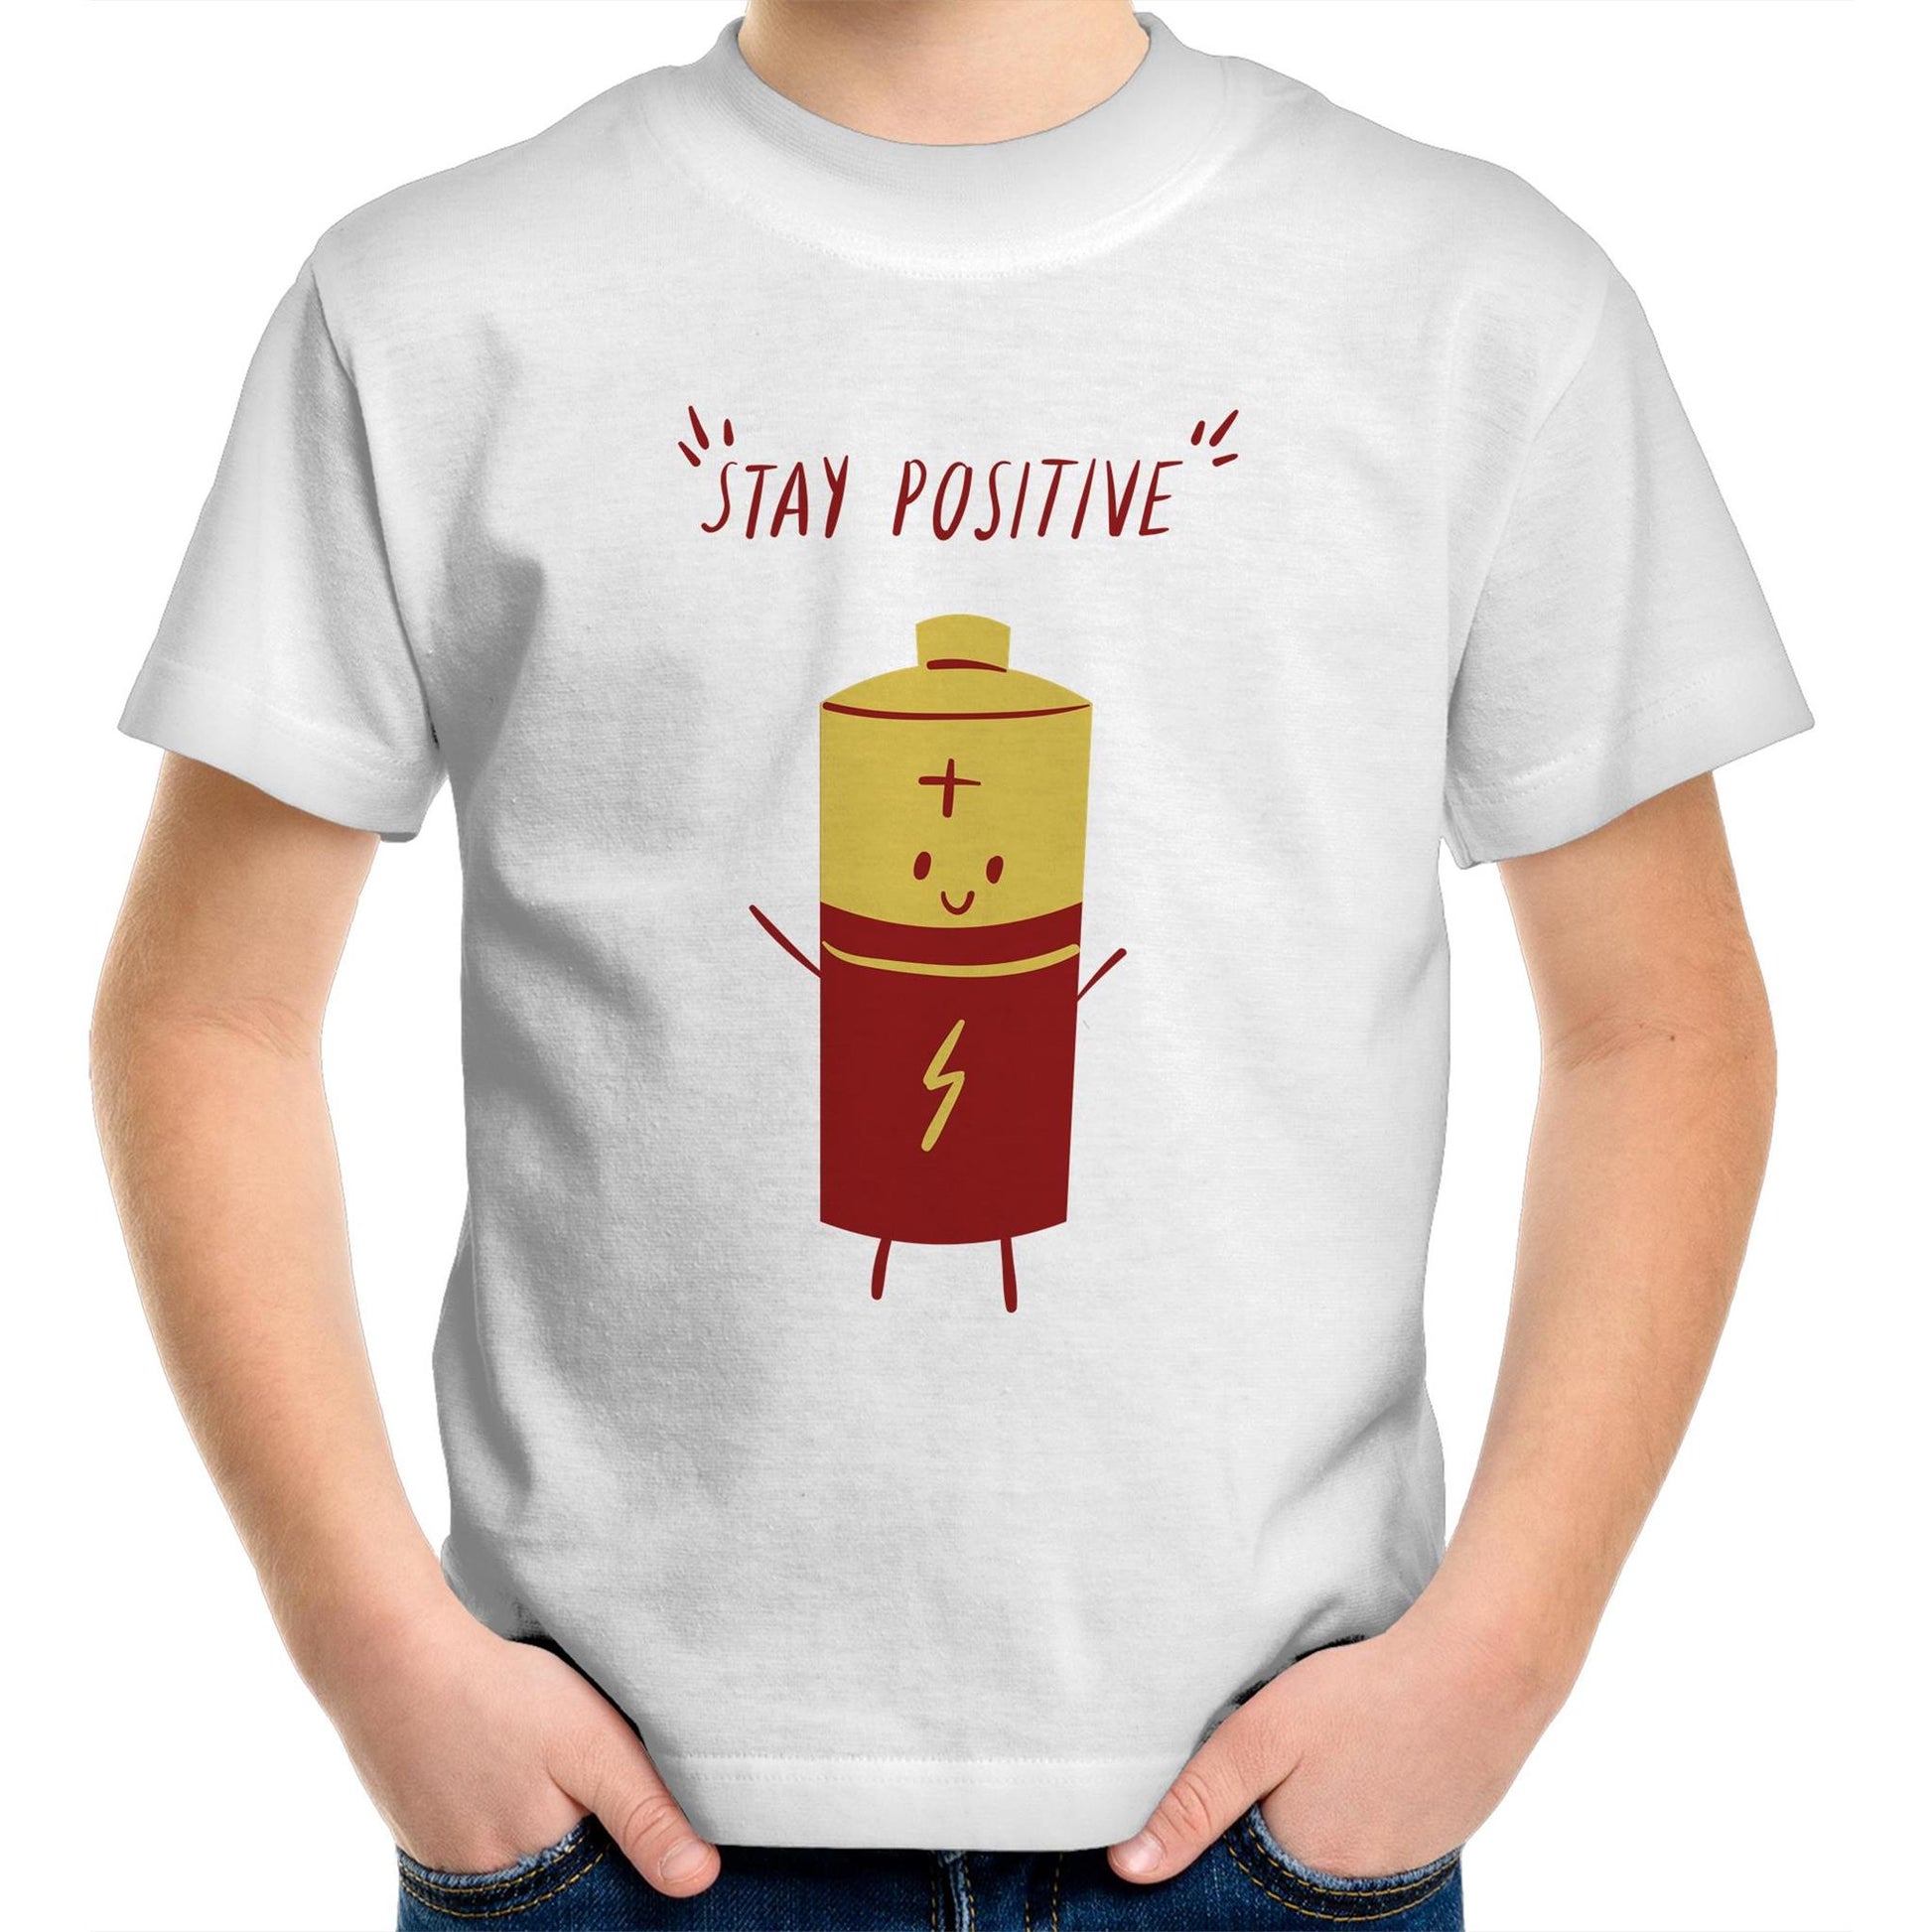 Stay Positive - Kids Youth Crew T-Shirt White Kids Youth T-shirt Funny